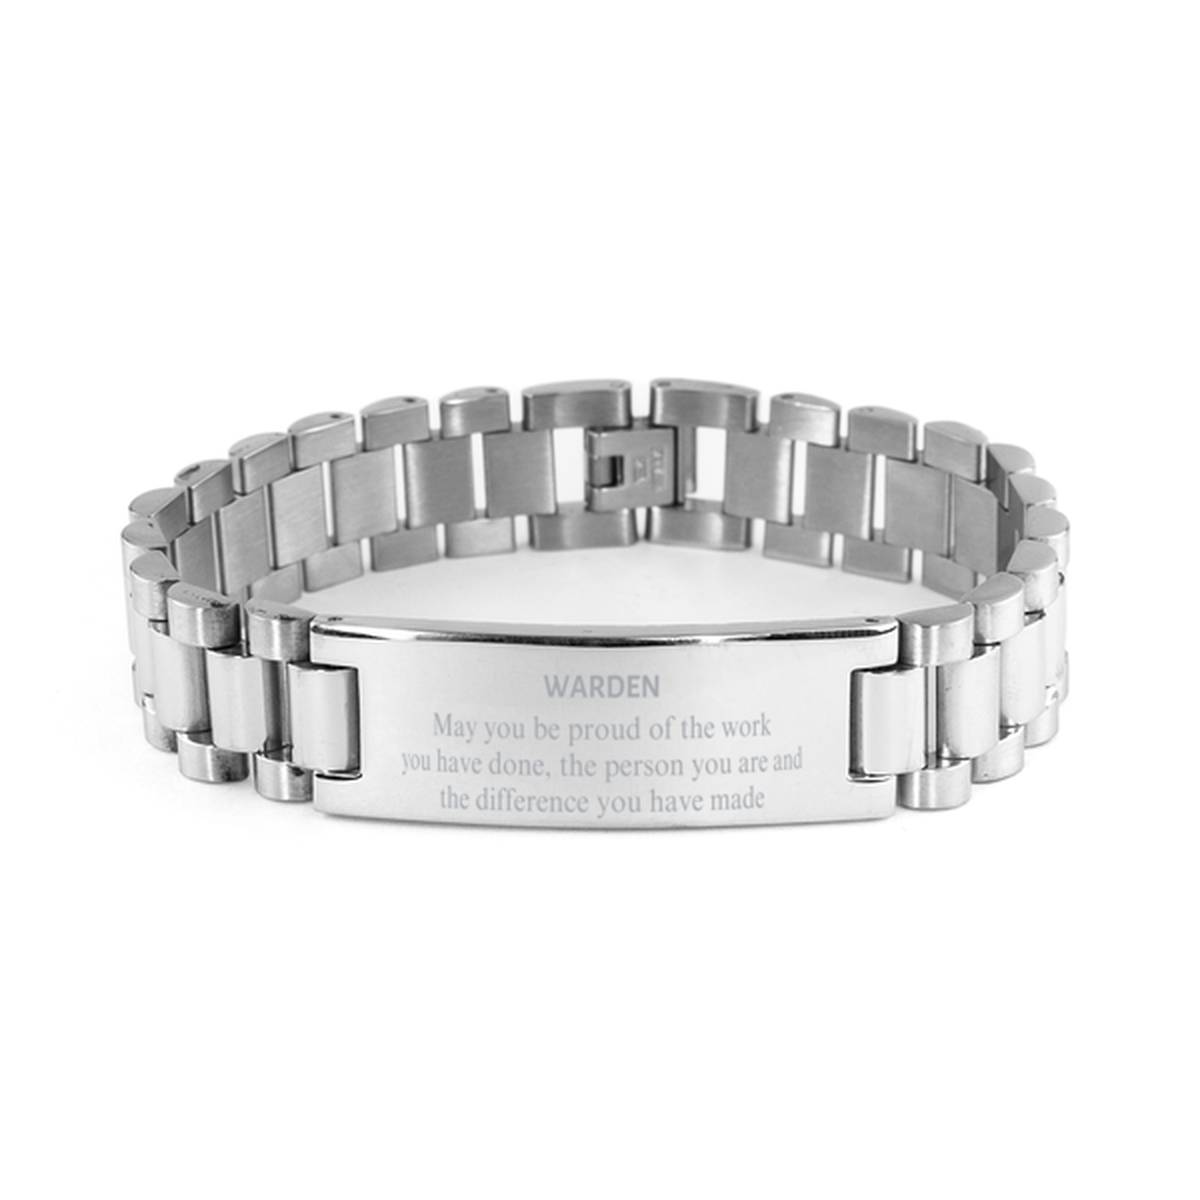 Warden May you be proud of the work you have done, Retirement Warden Ladder Stainless Steel Bracelet for Colleague Appreciation Gifts Amazing for Warden